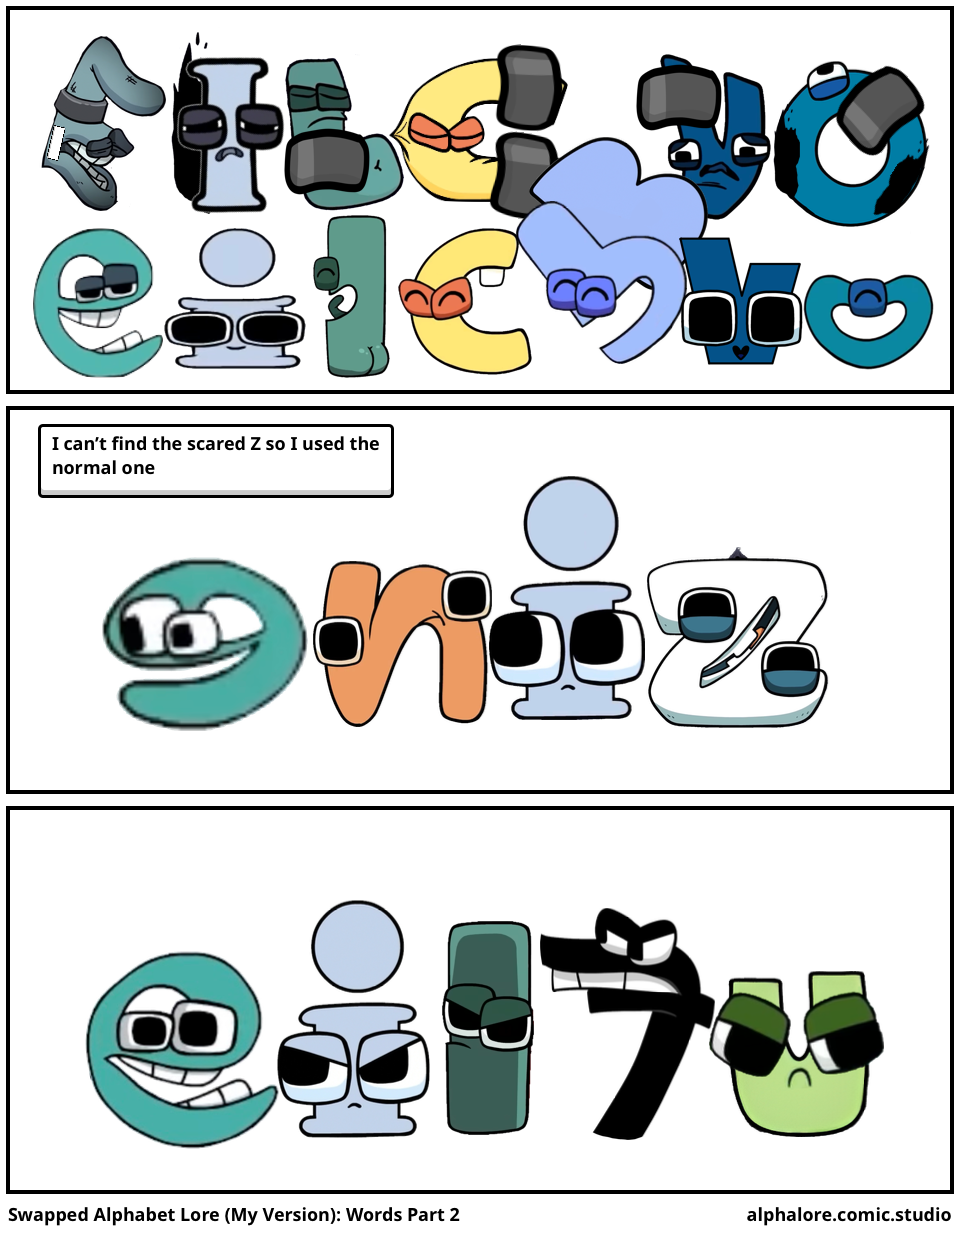 Which Z will I use in my Swapped Alphabet Lore? - Comic Studio